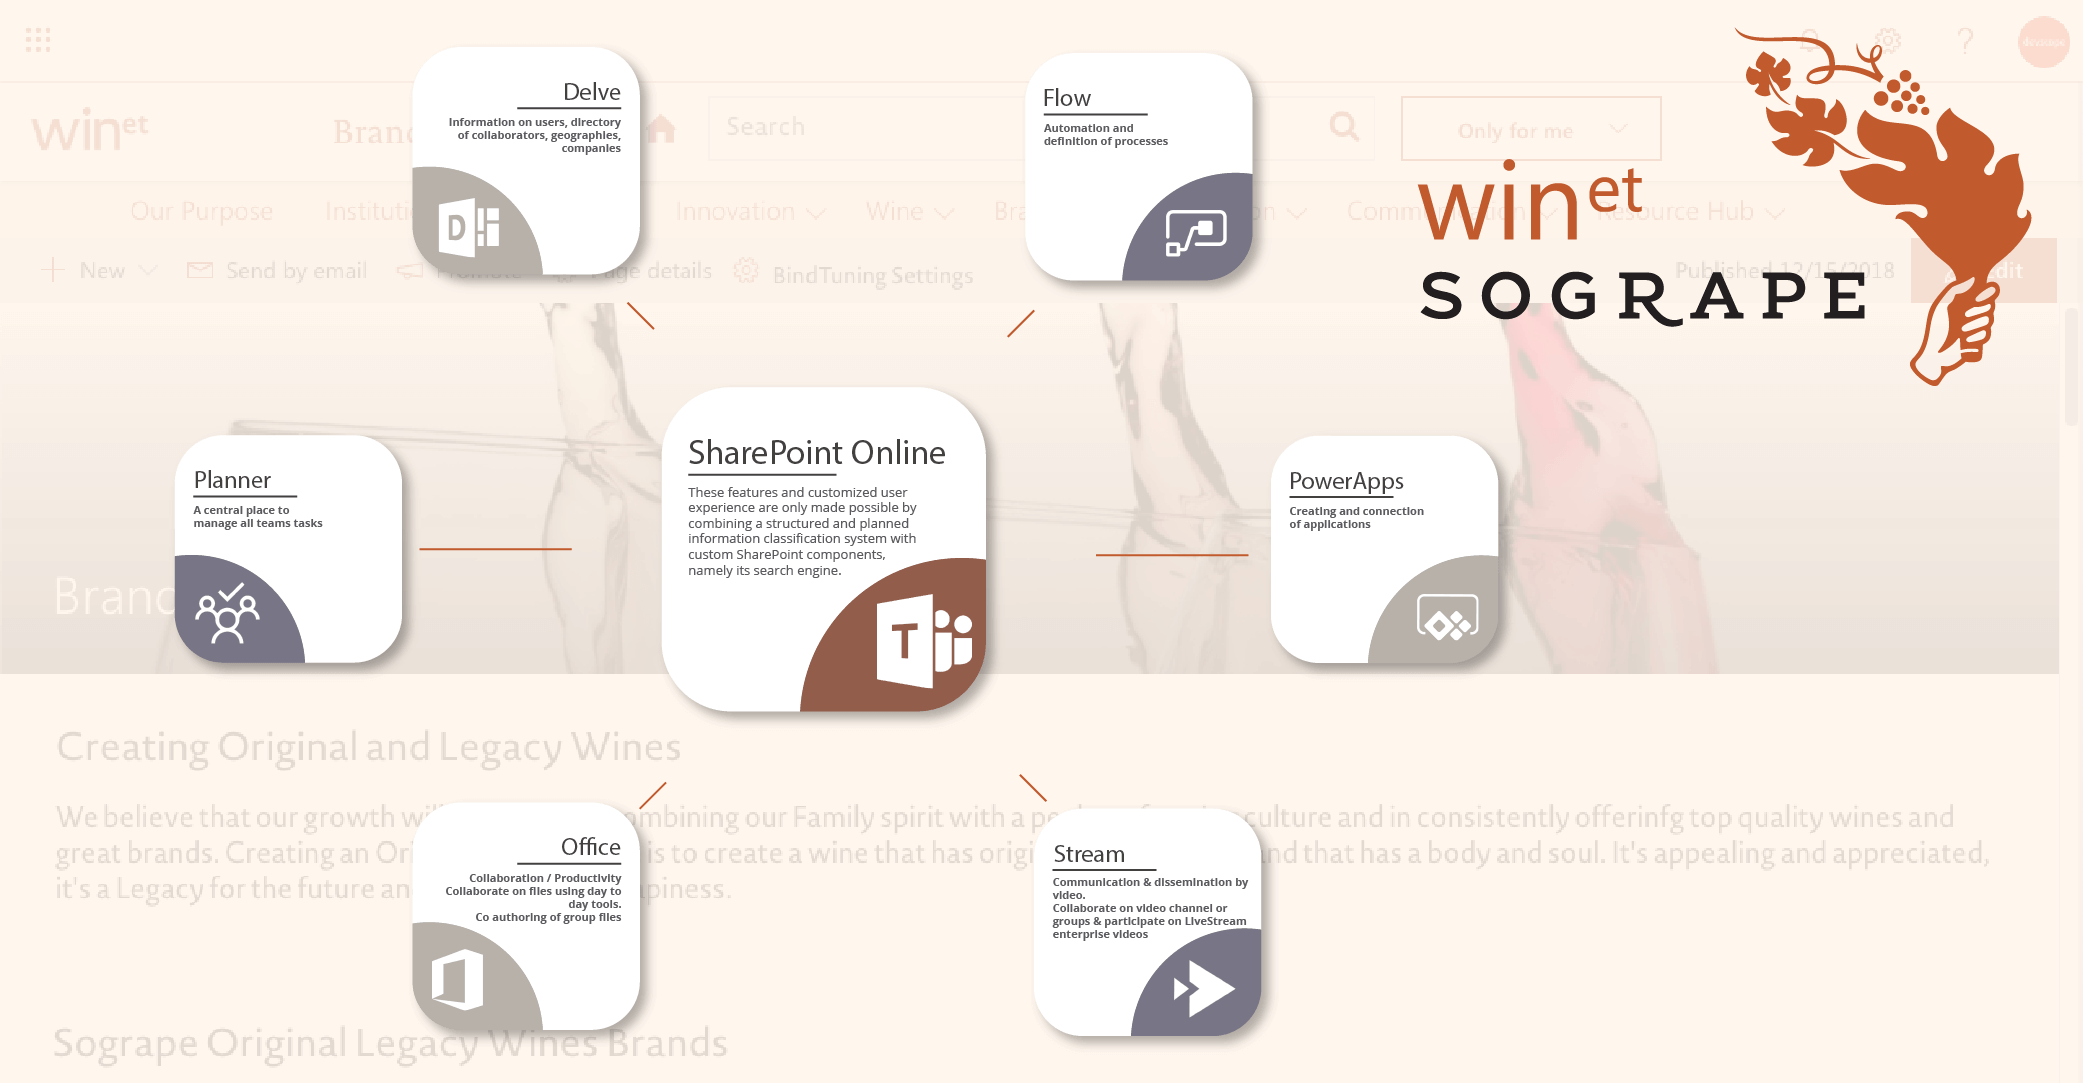 Sogrape WINet takes full advantage of Office 365's extensive list of productivity features